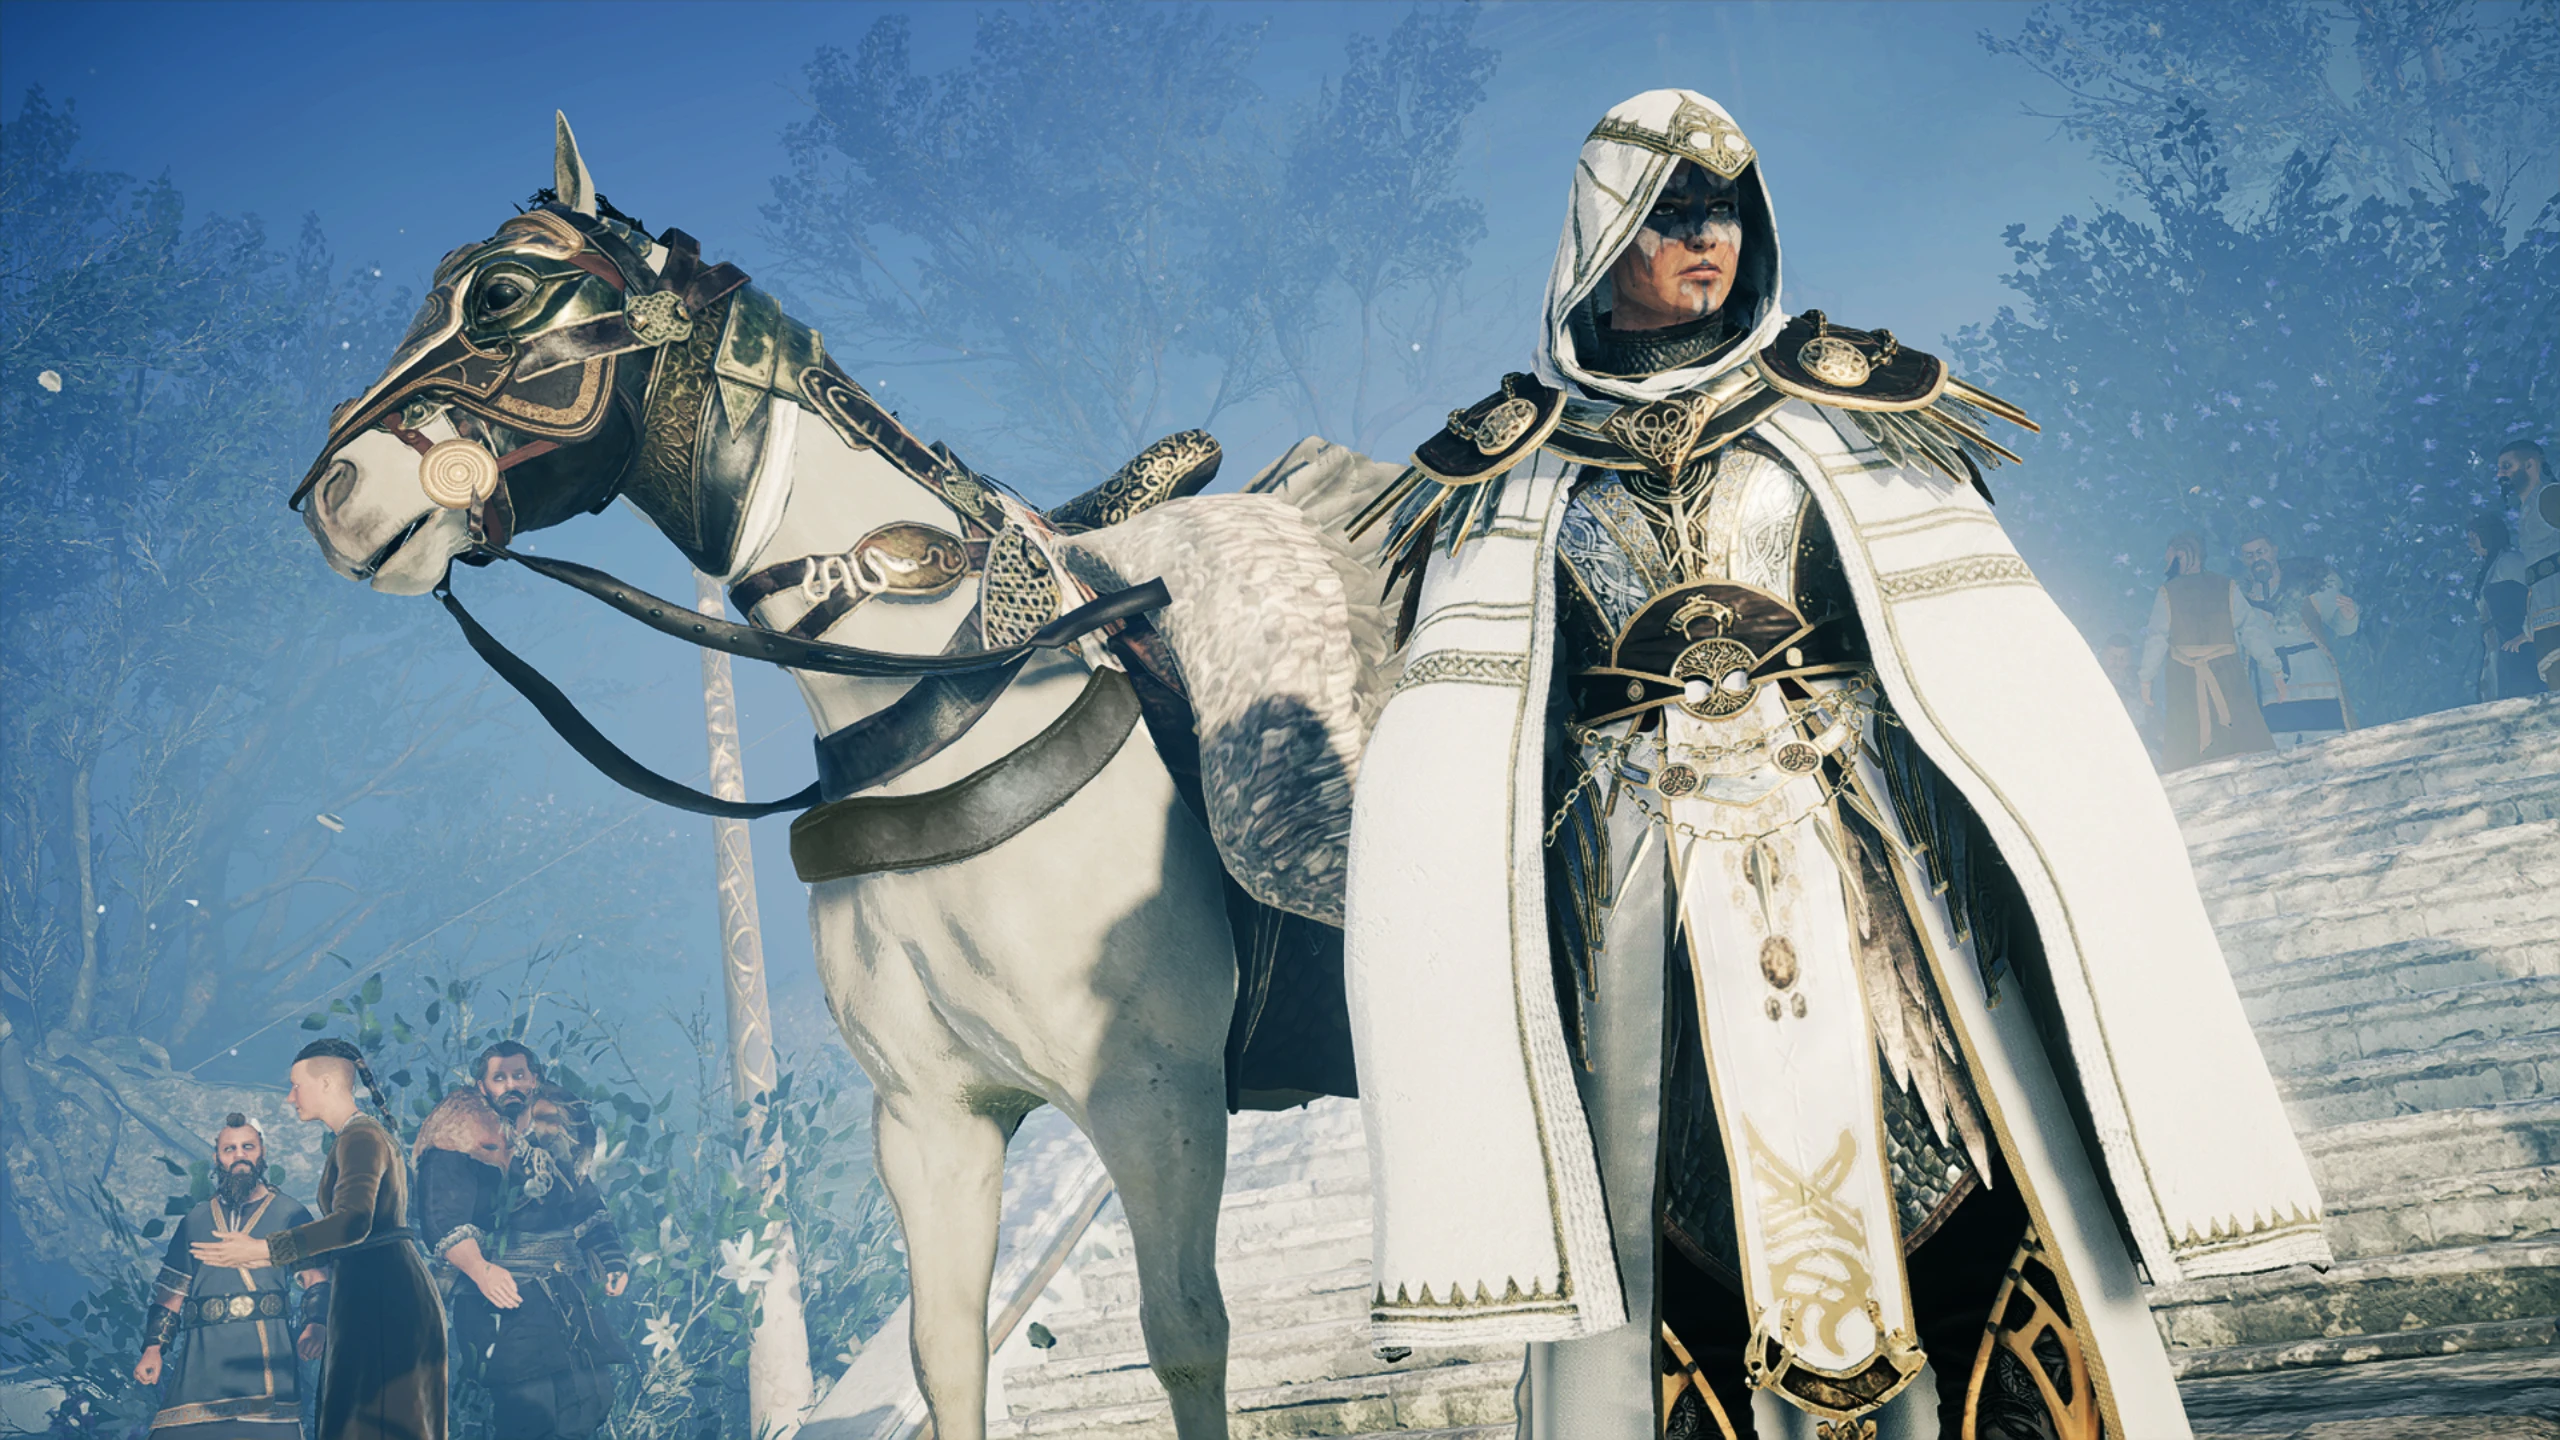 Mods of the month at Assassin's Creed Valhalla Nexus - Mods and community